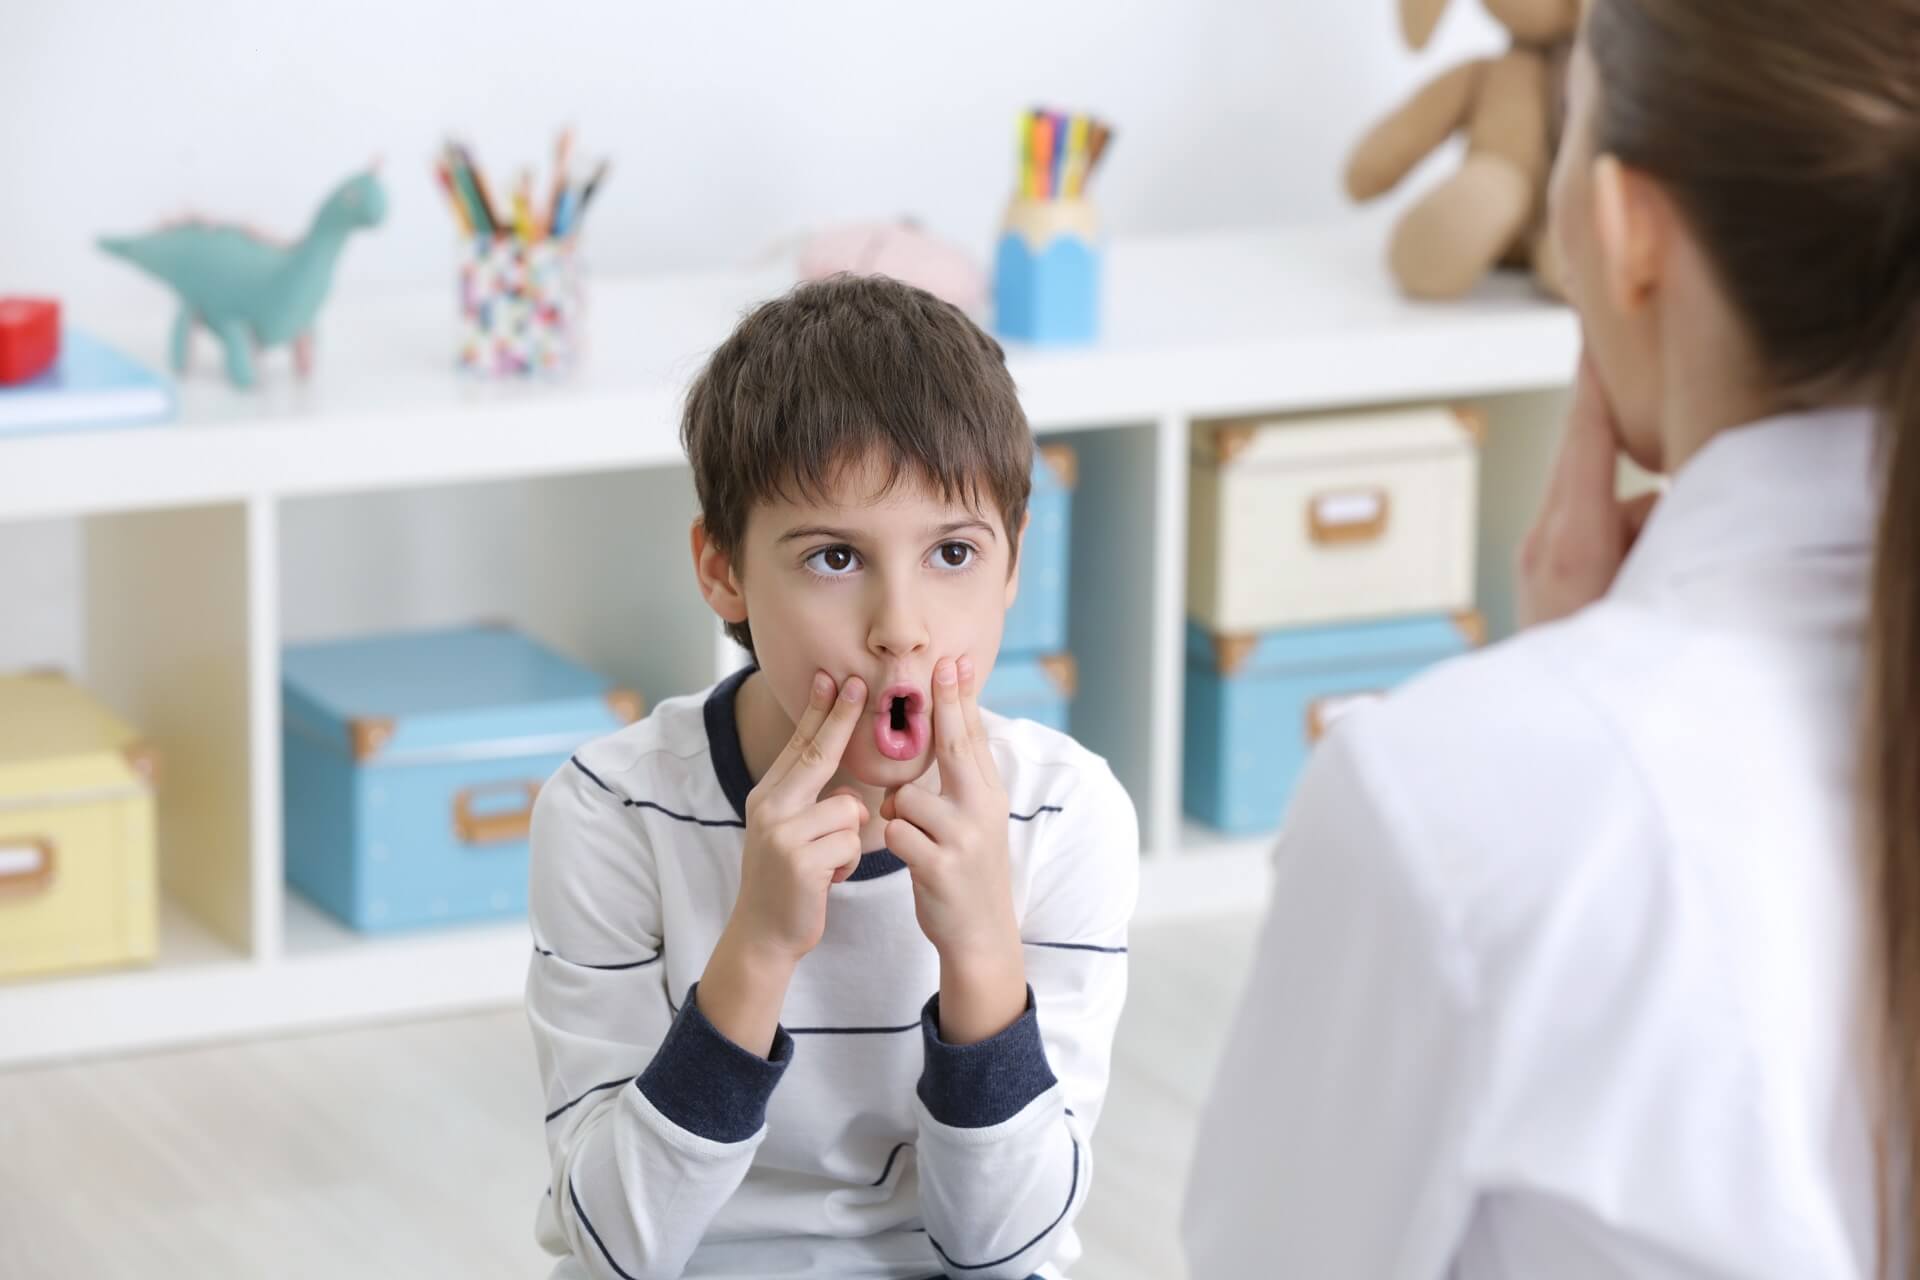 Does My Child Need Speech Therapy